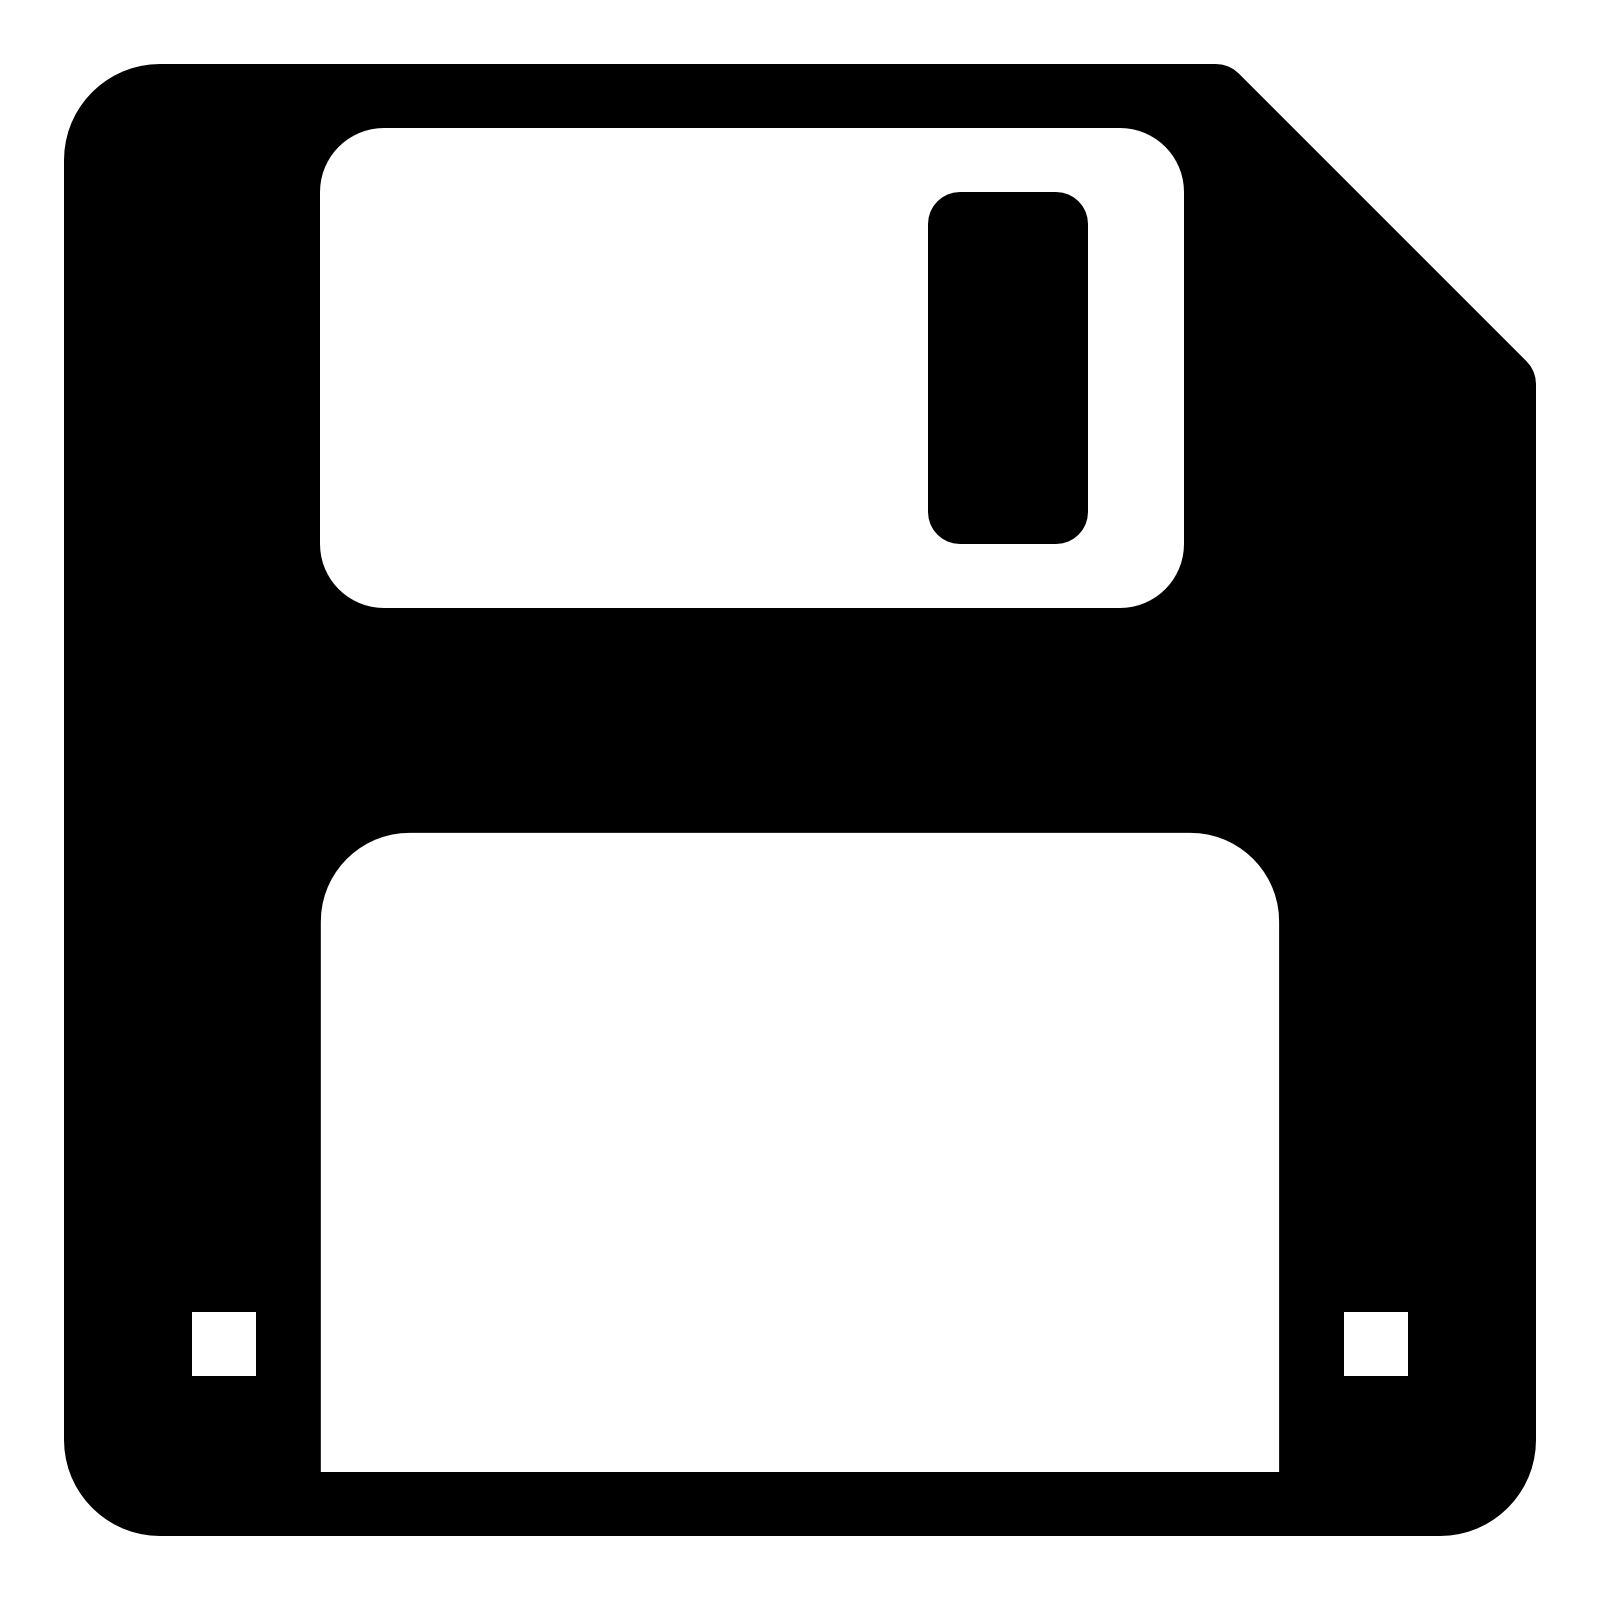 Save Button PNG File Download Free